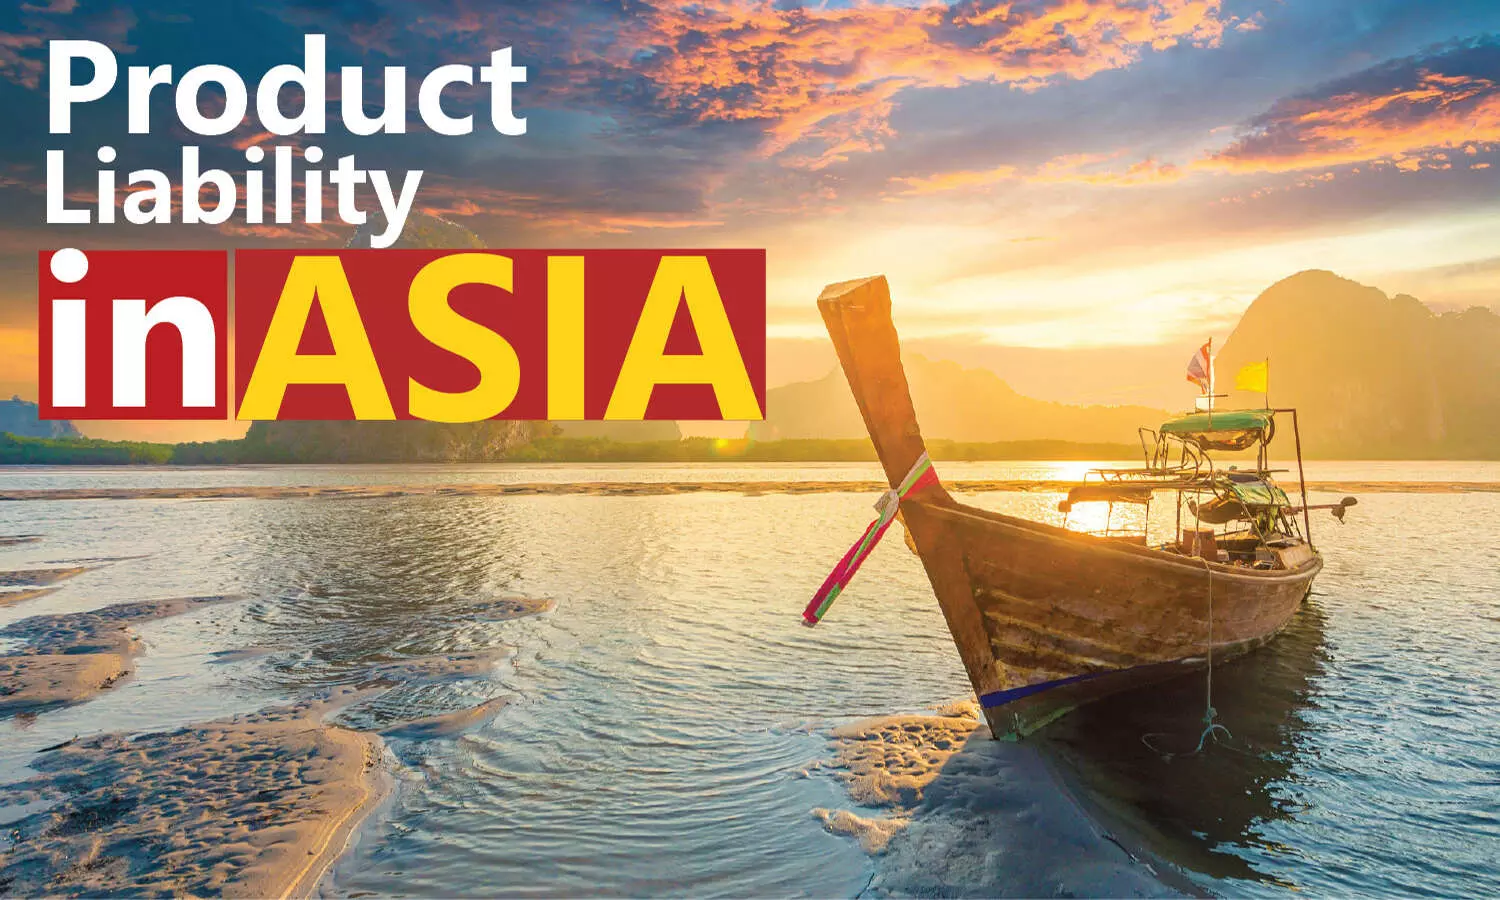 Product Liability in Asia